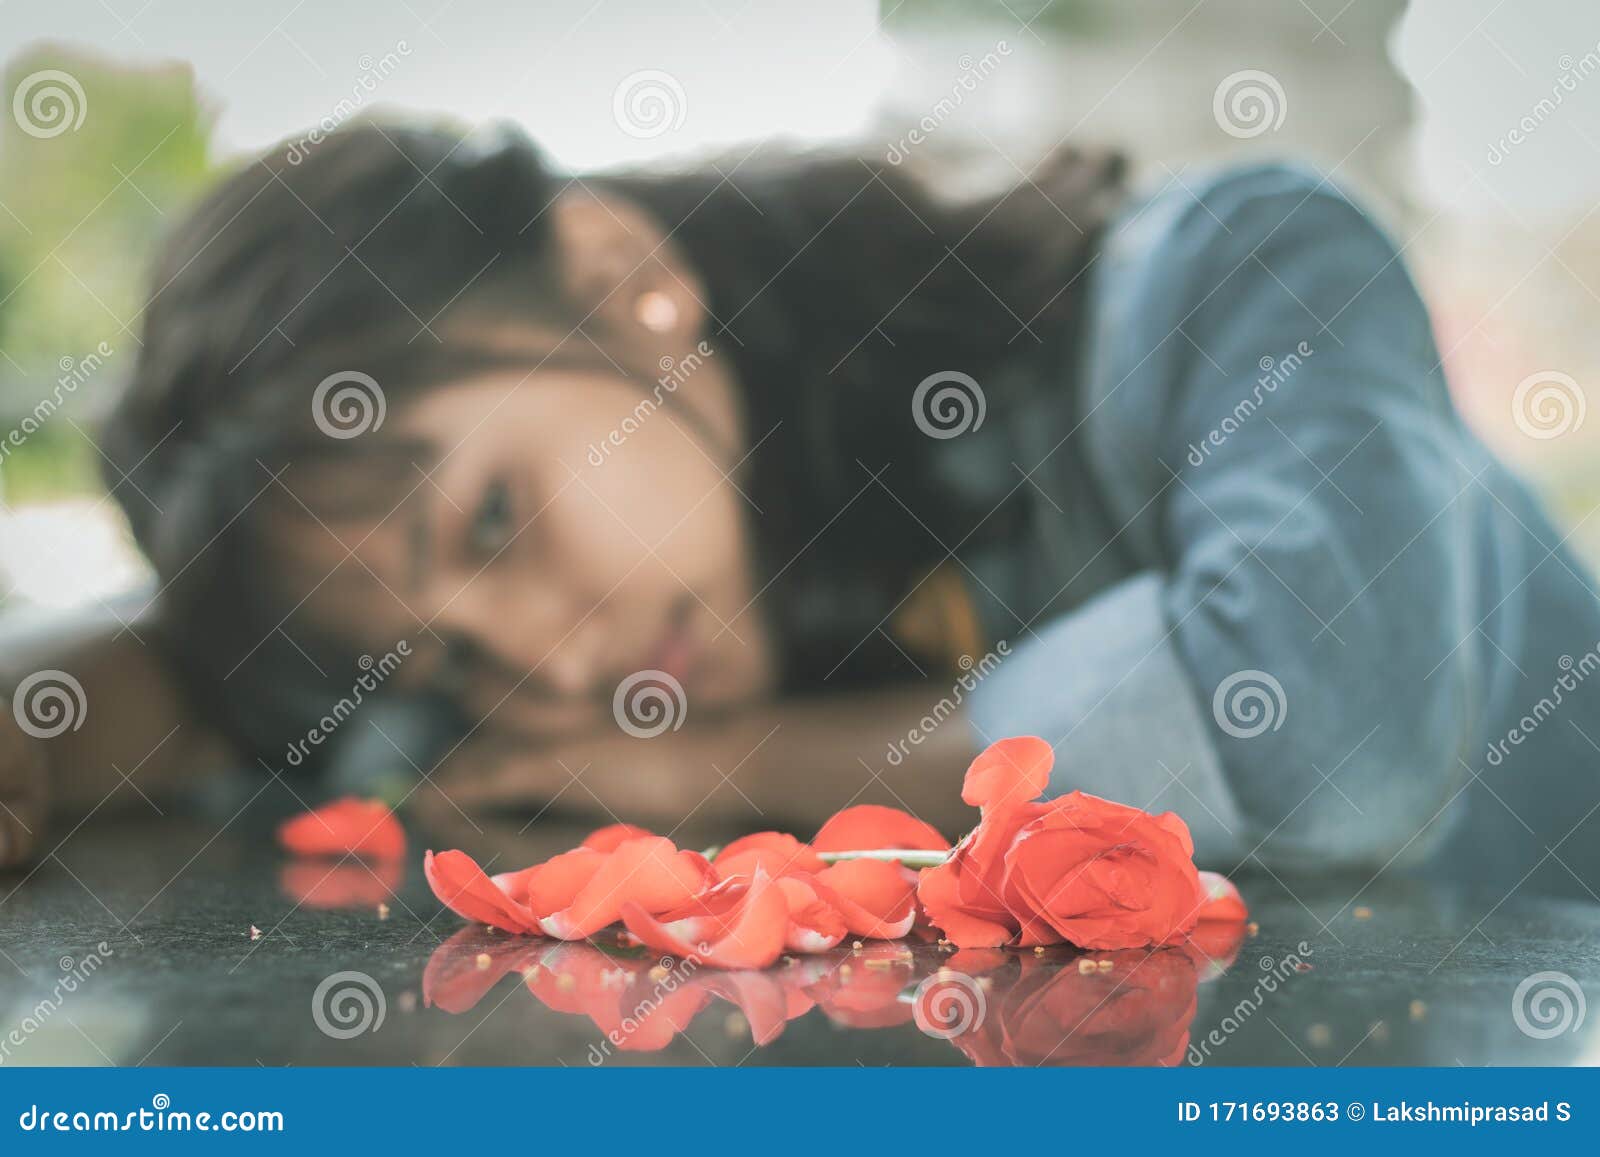 Selective Focus on Red Rose Lonely Young Teenager - Concept of ...